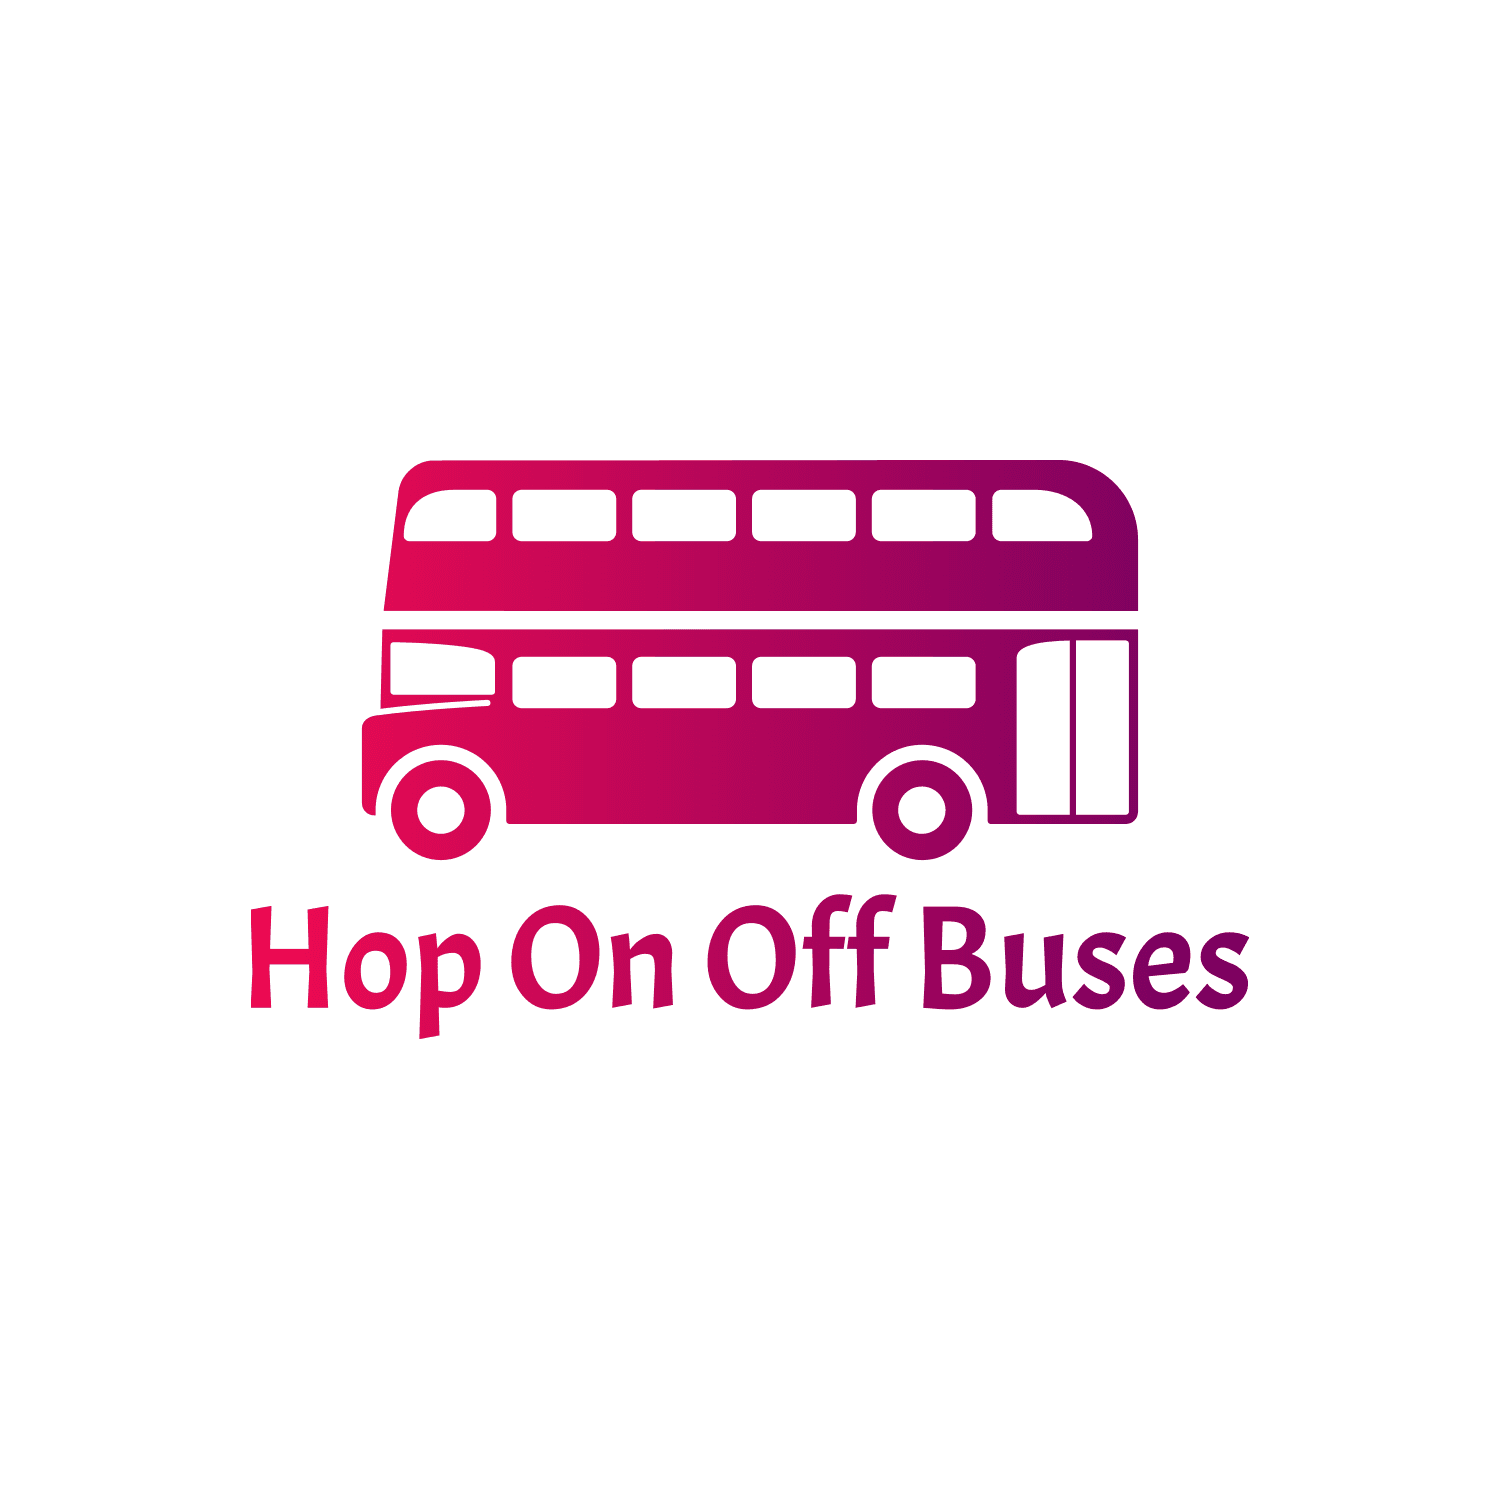 HopOnOffBusses.com is a comprehensive travel resource dedicated to providing detailed information about hop-on, hop-off bus services and sightseeing passes in New York City and other popular destinations.